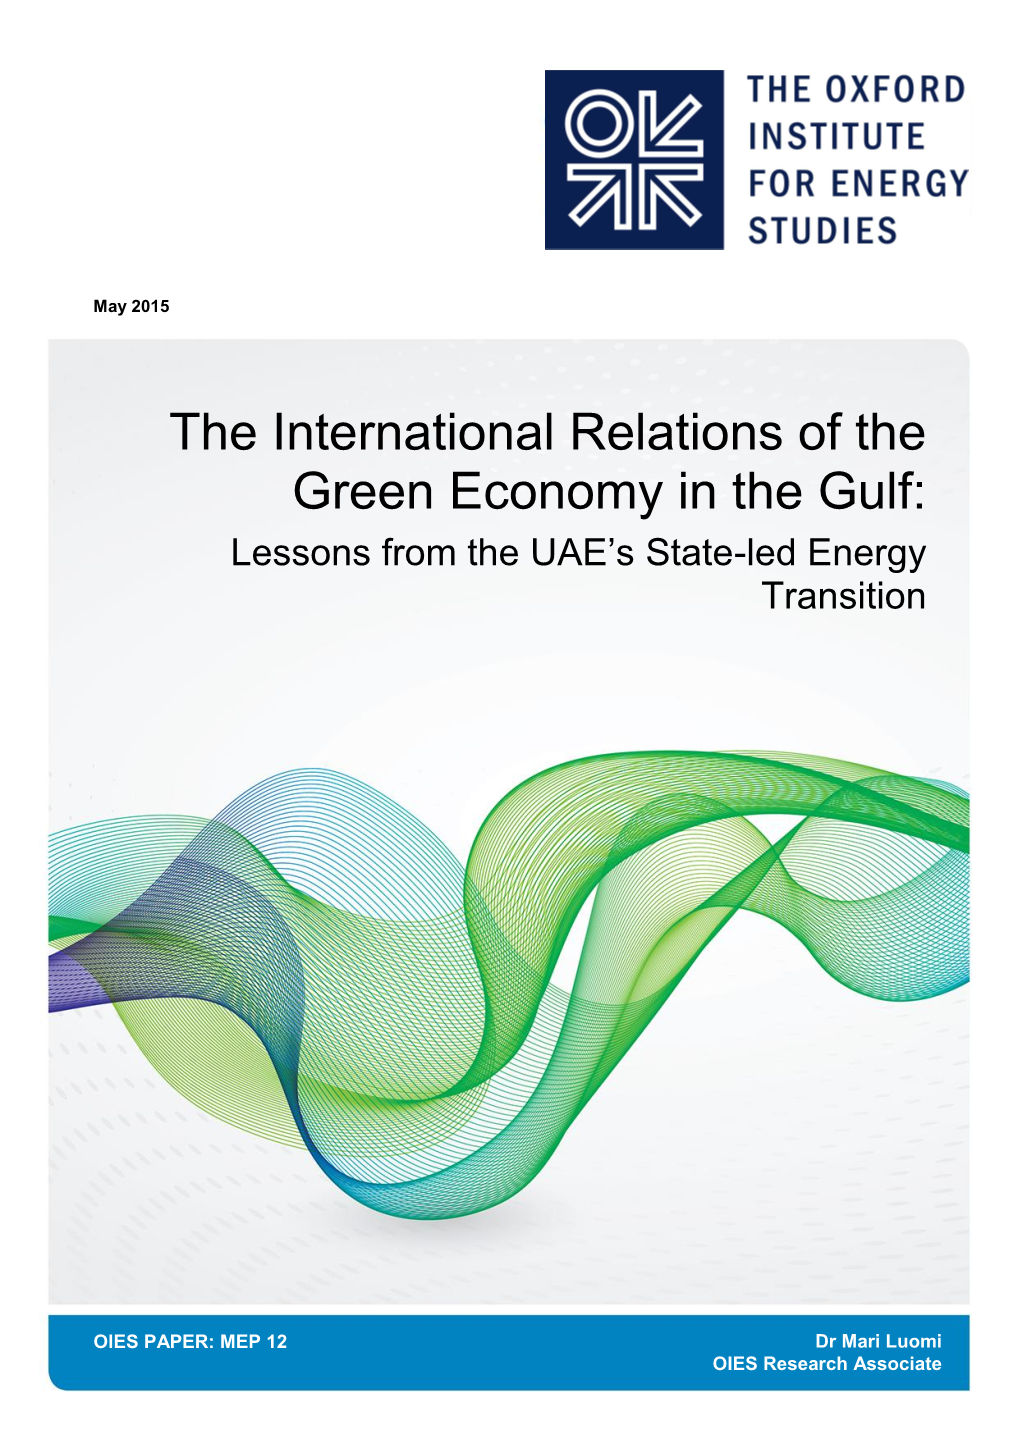 The International Relations of the Green Economy in the Gulf: Lessons from the UAE’S State-Led Energy Transition